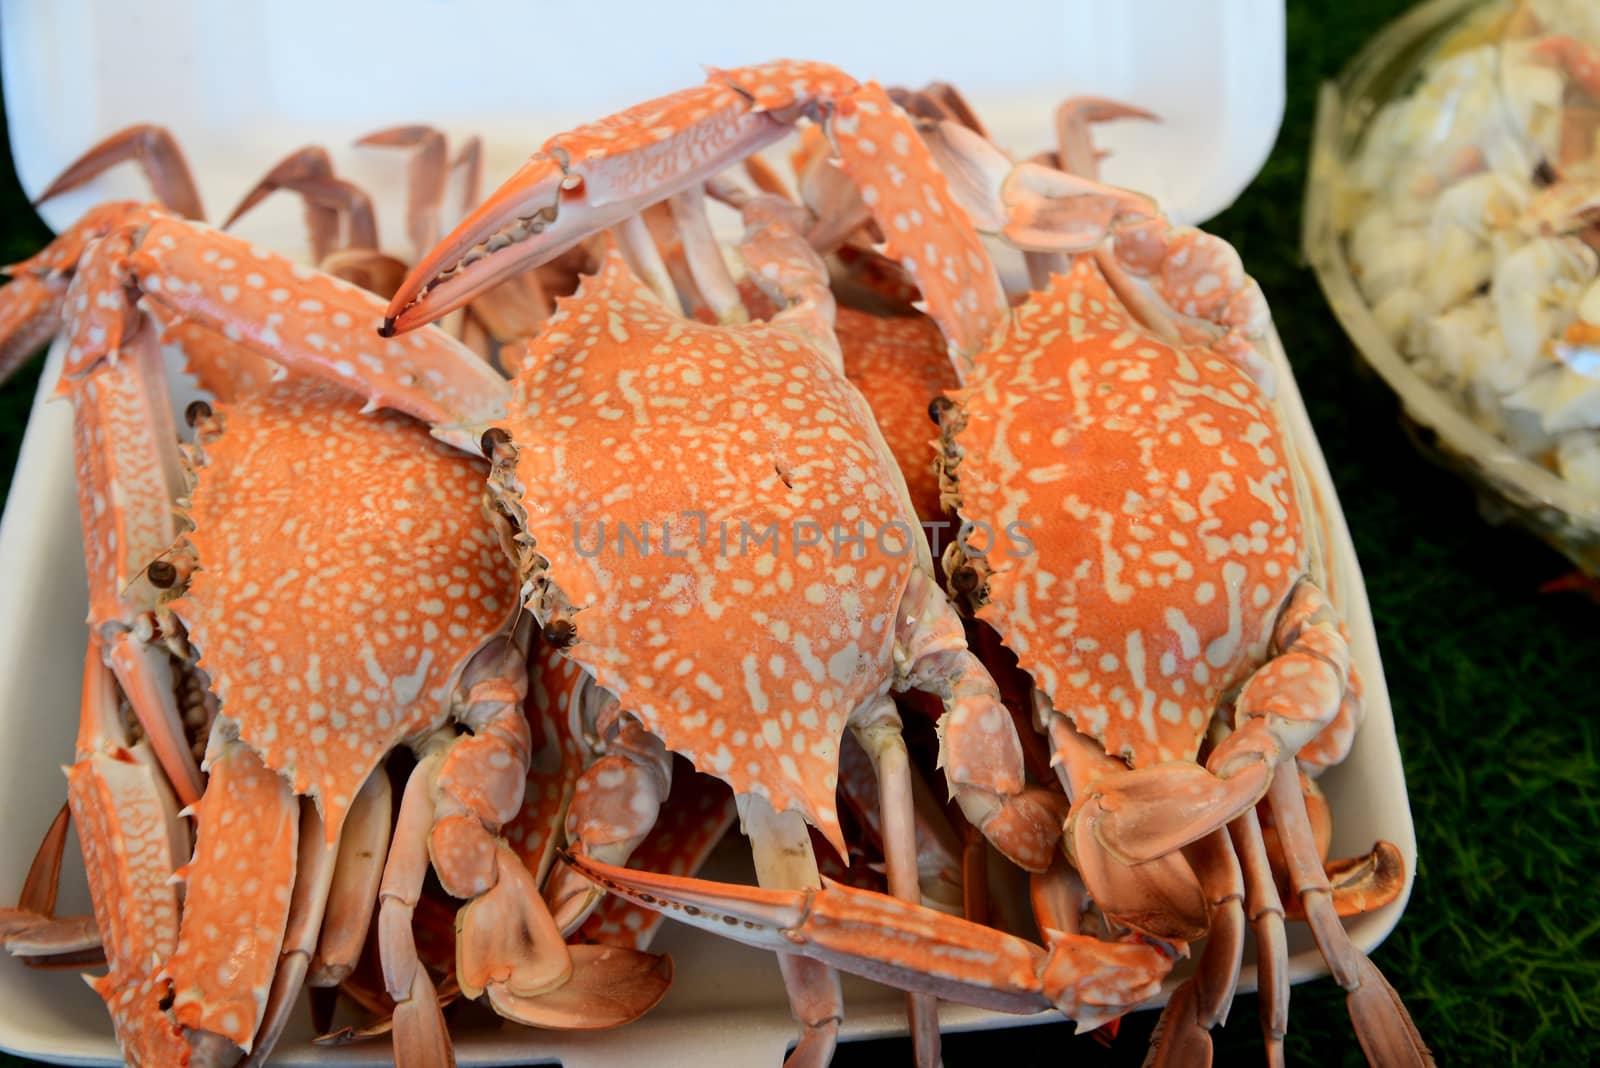 Steamed Blue Crabs in foam box for sell